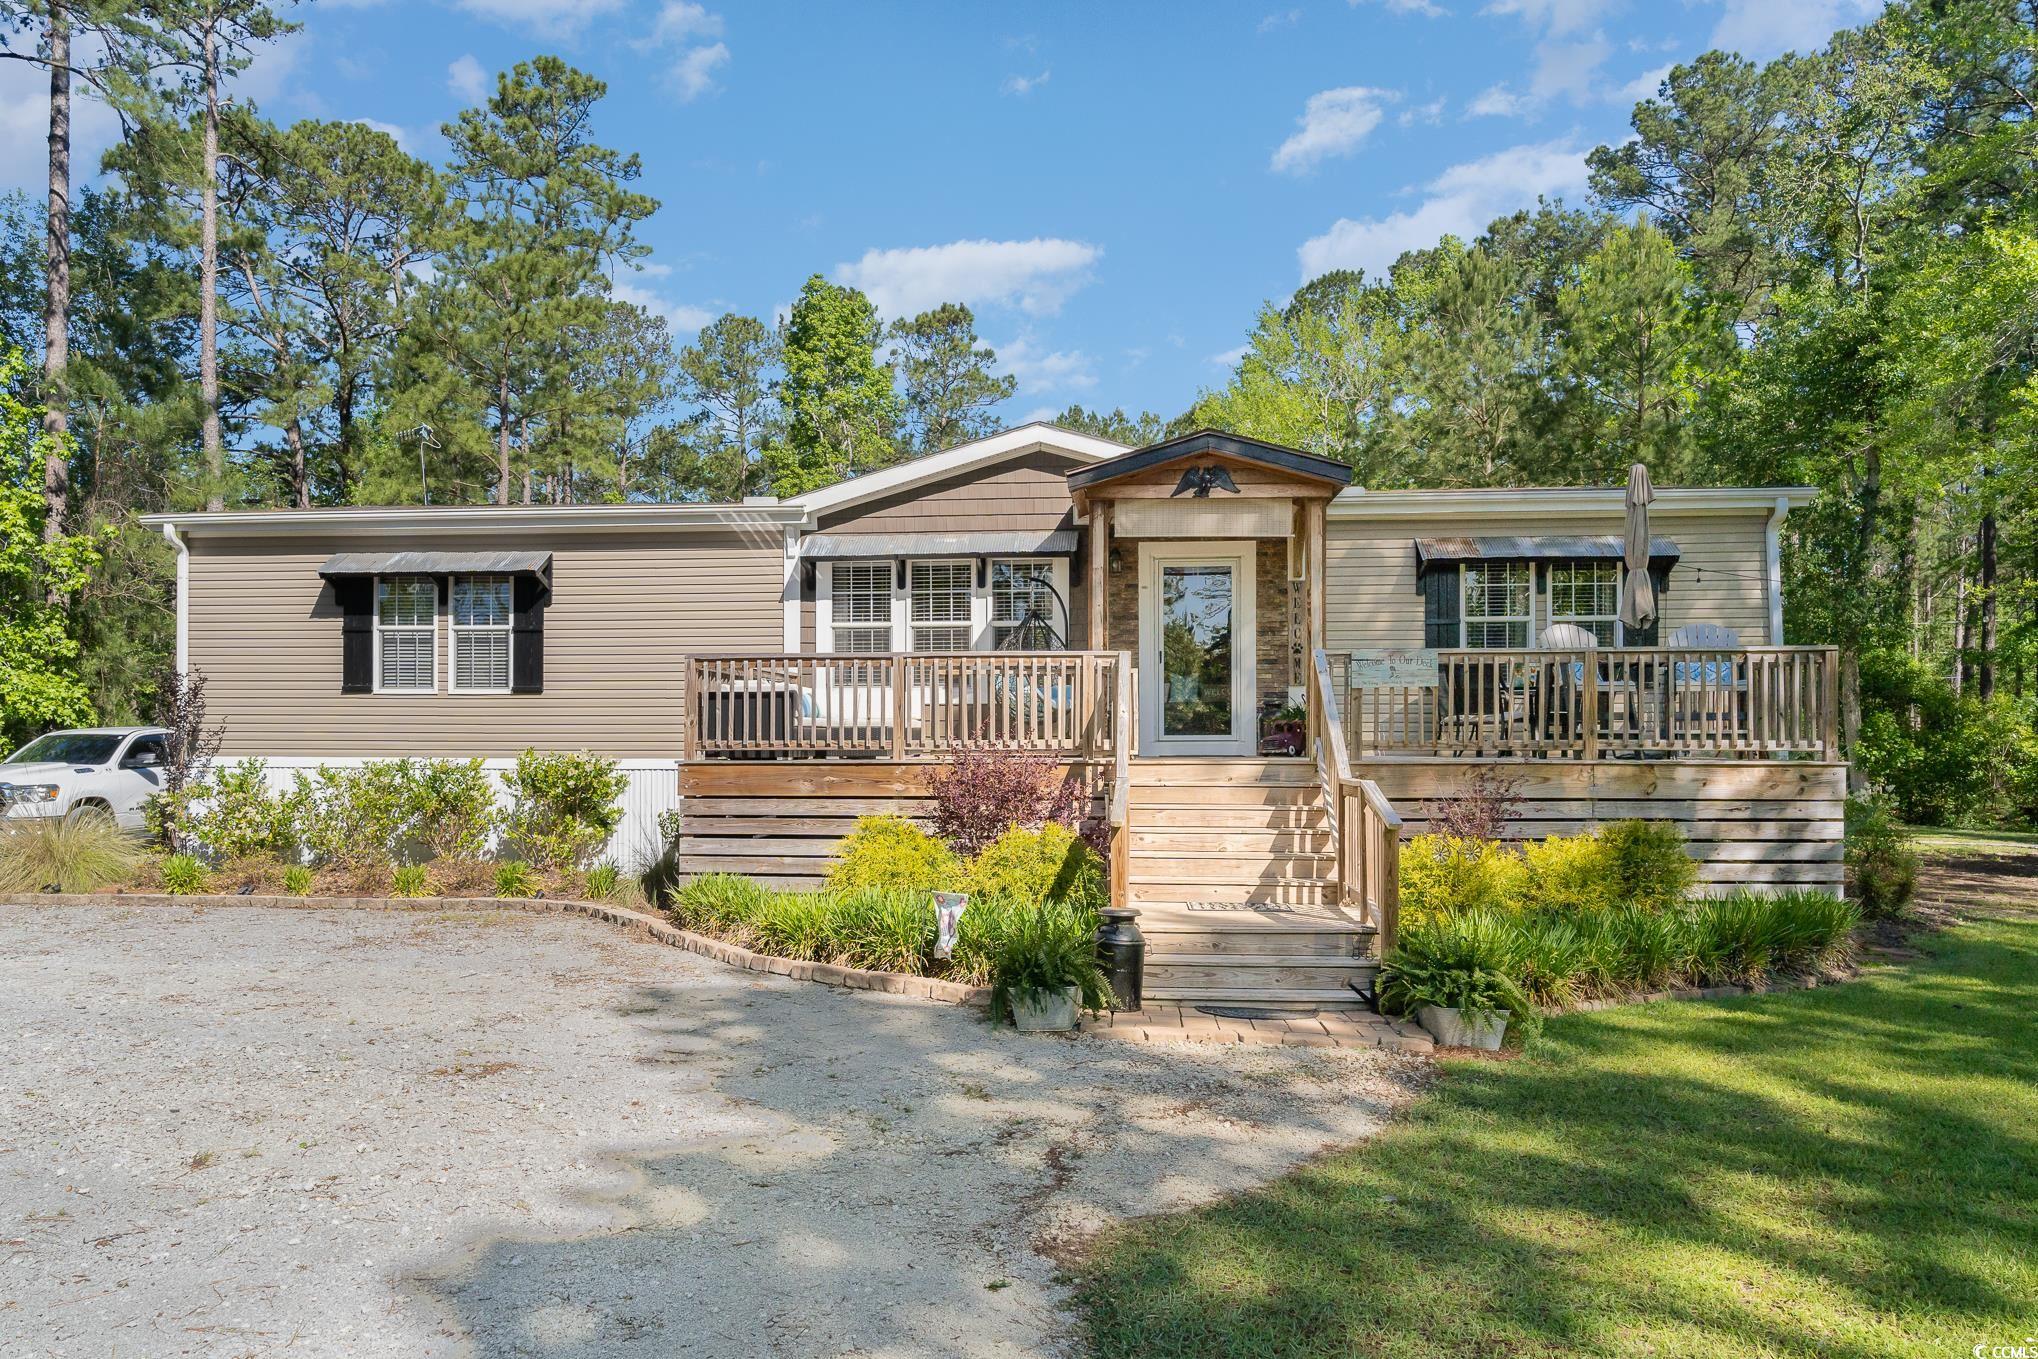 141 Old Country Rd. Longs, SC 29568